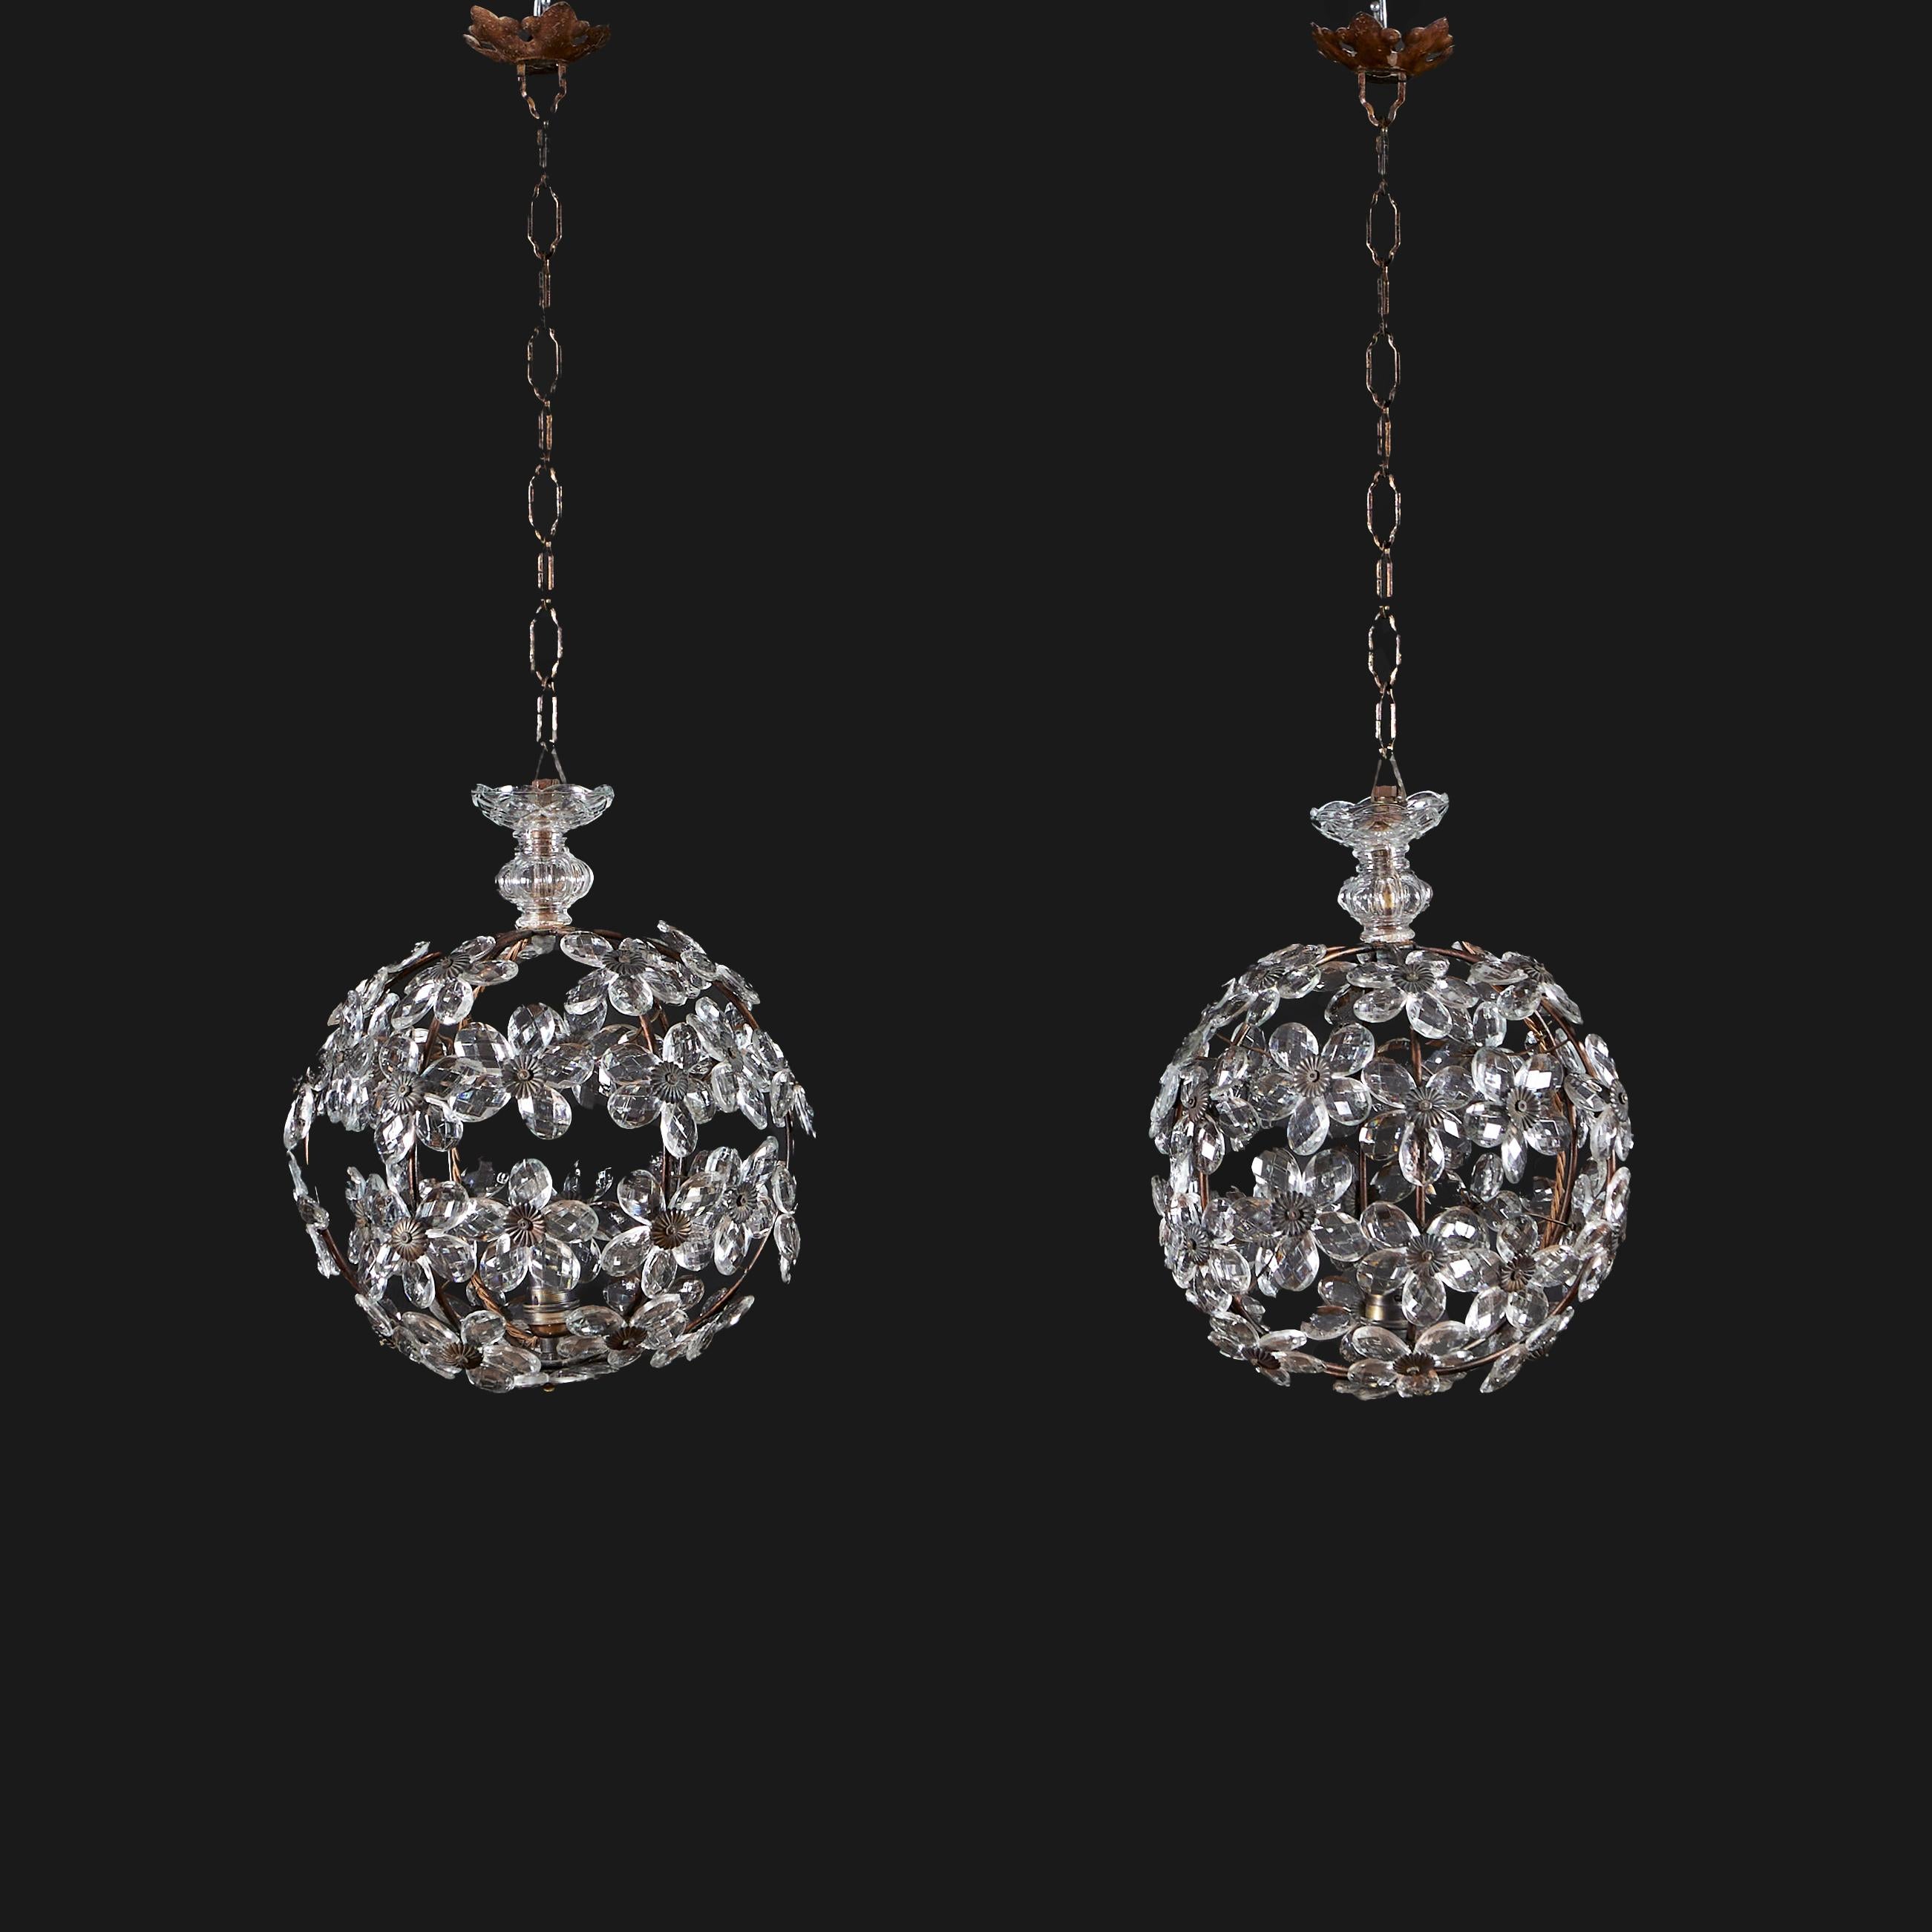 France, circa 1940

A pair of unusual cut glass and bronze lanterns, of spherical form, decorated with daisy flowers throughout, the petals in cut glass with bronze paterae to the centres. After Maison Bagues.

Height with chain           